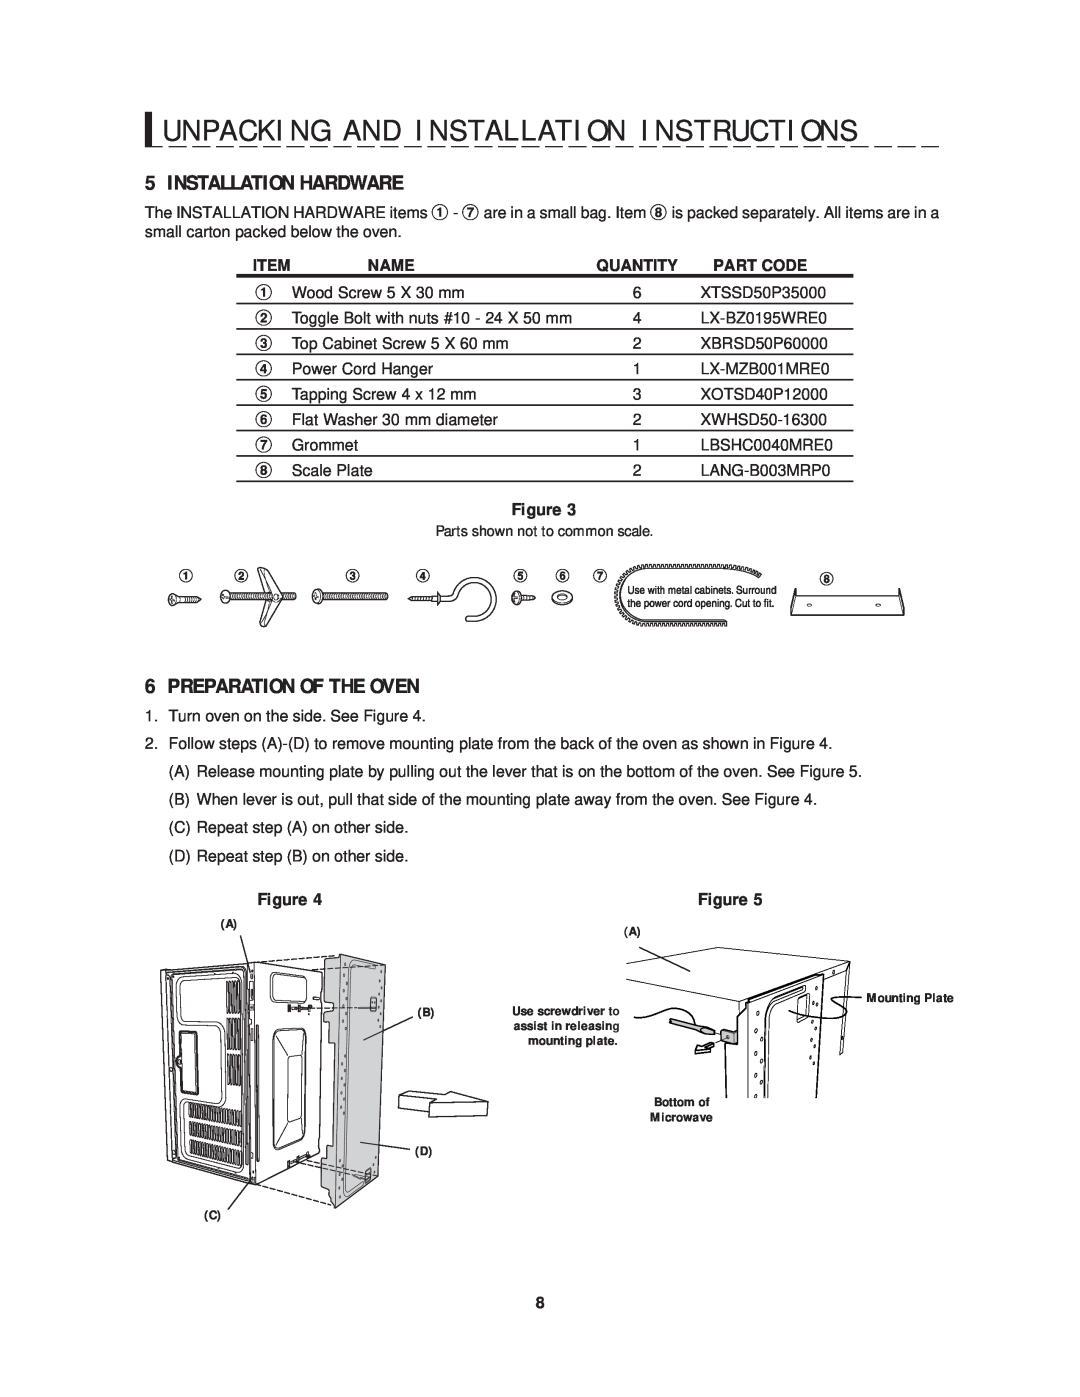 Sharp R-1214 operation manual Installation Hardware, Preparation Of The Oven, Name, Quantity, Part Code 